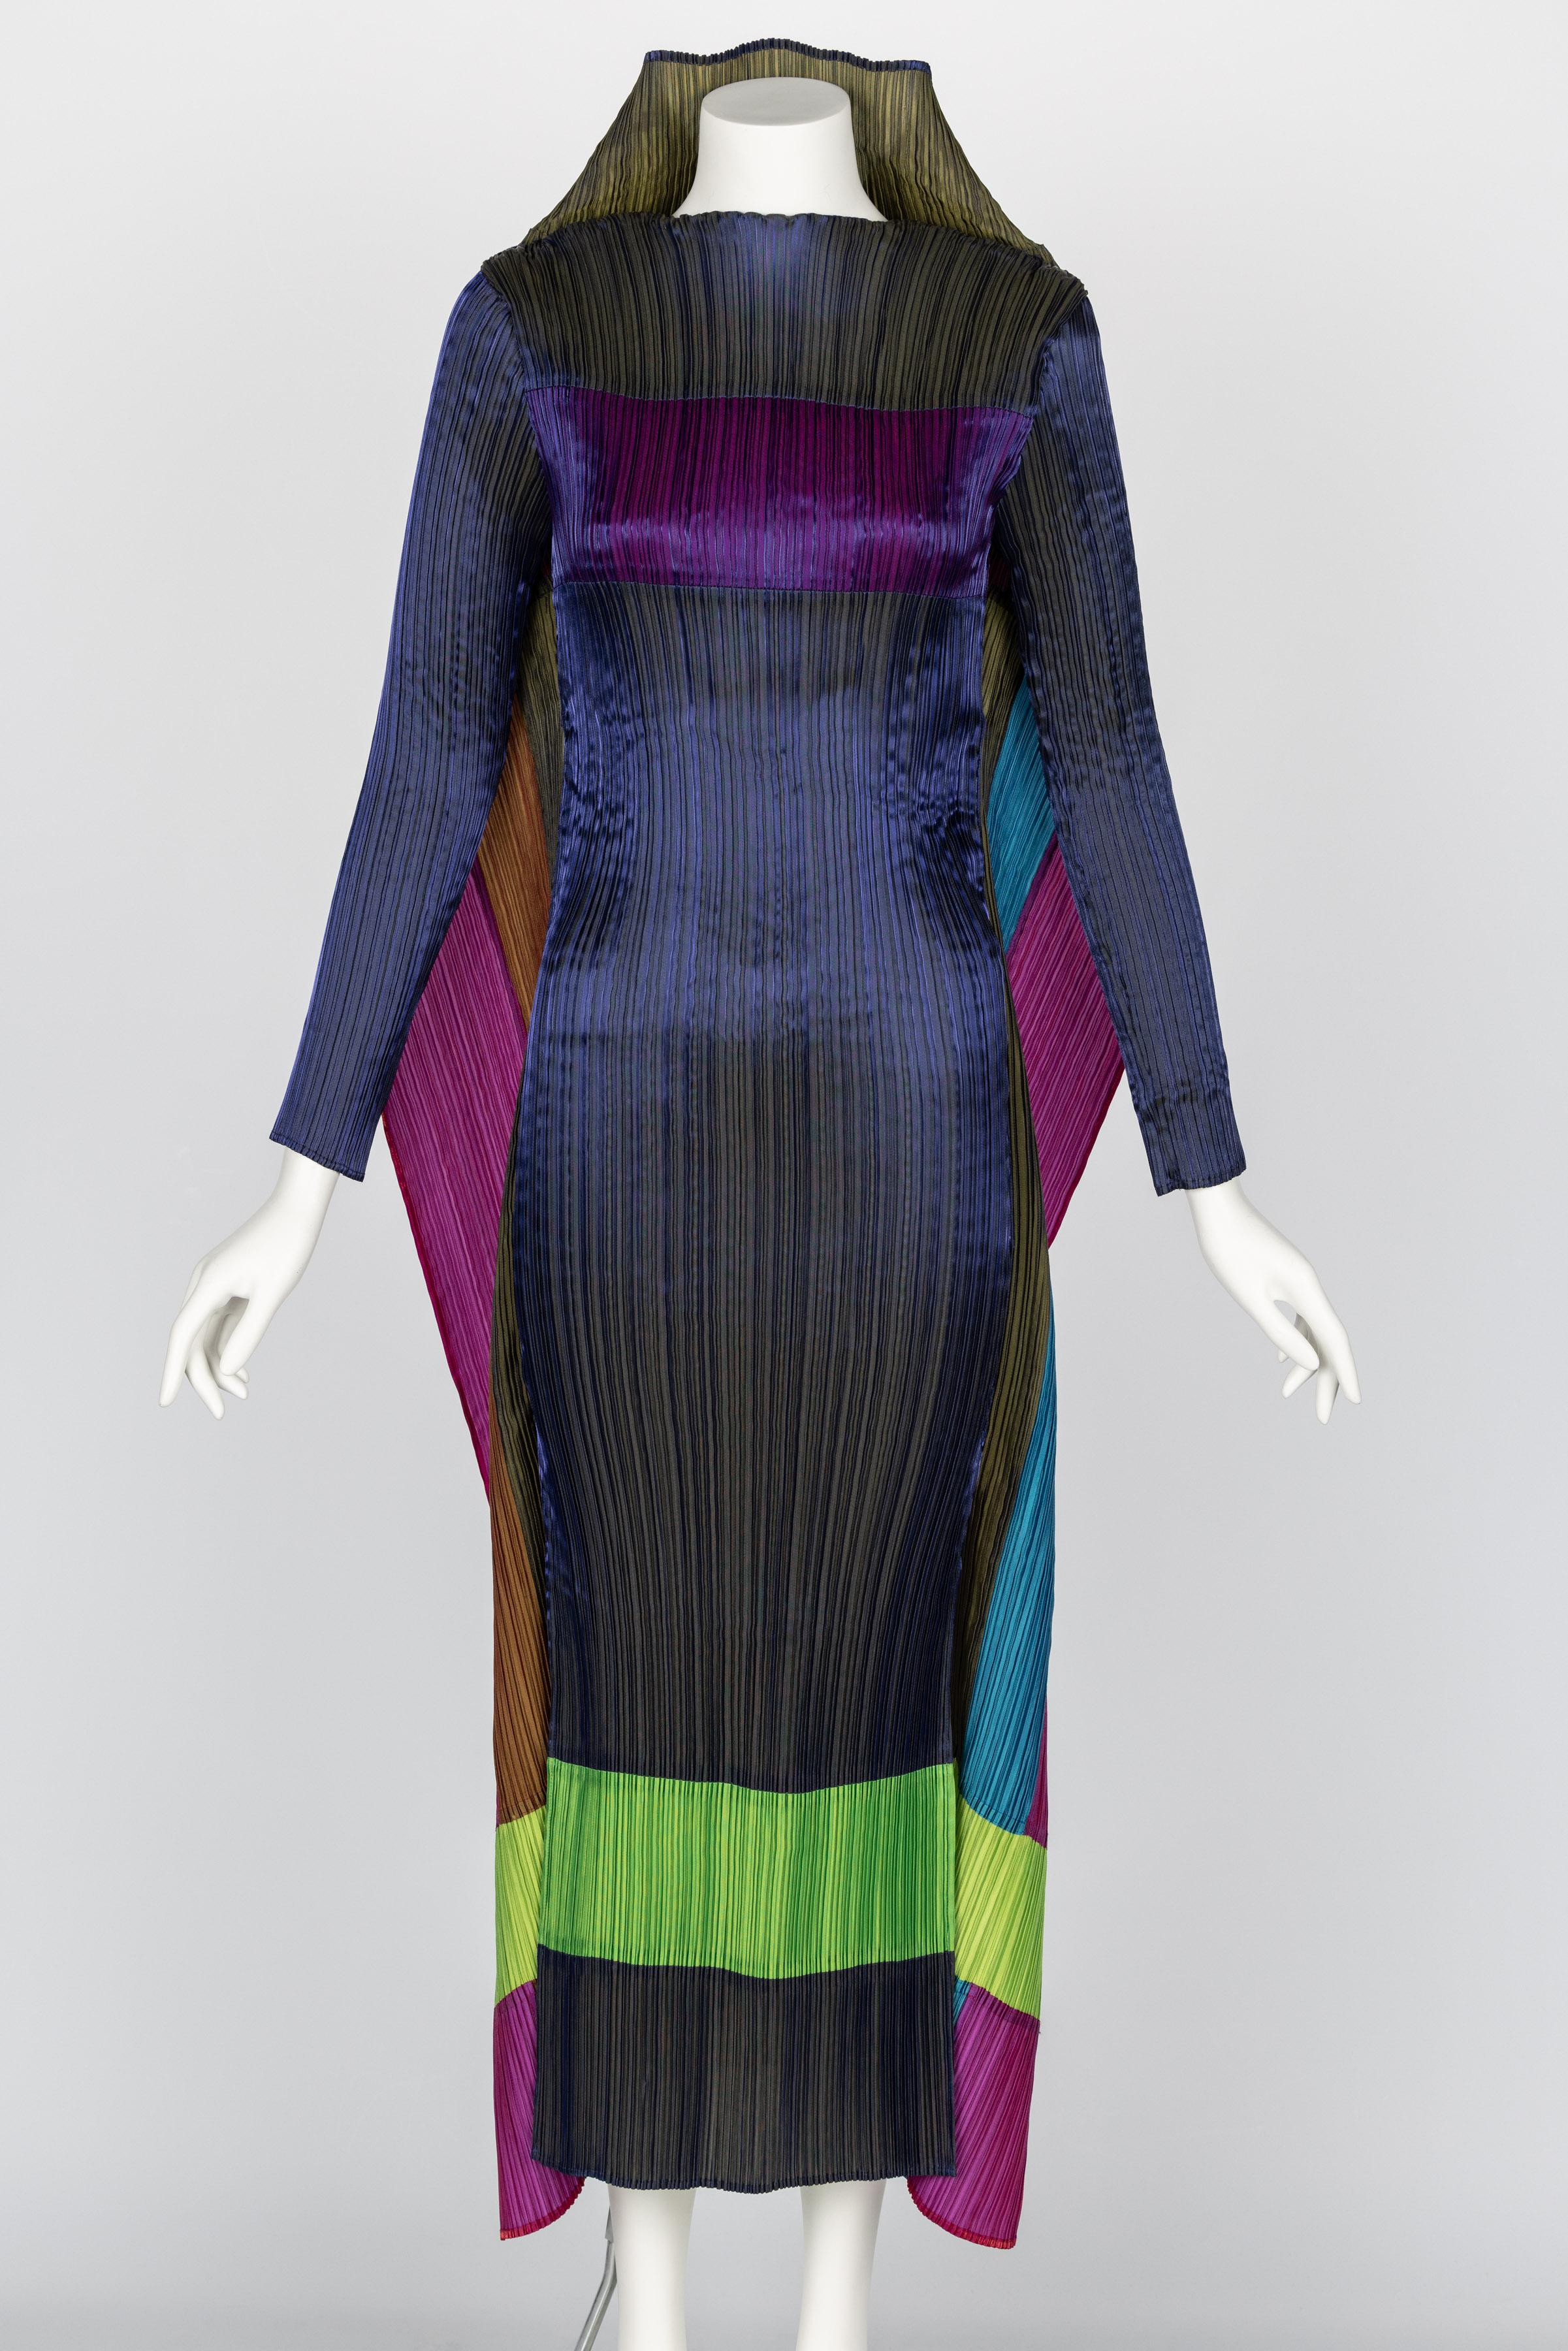 Incredible Rare Issey Miyake Pleats Please Avant Garde Color Block Dress In Excellent Condition For Sale In Boca Raton, FL